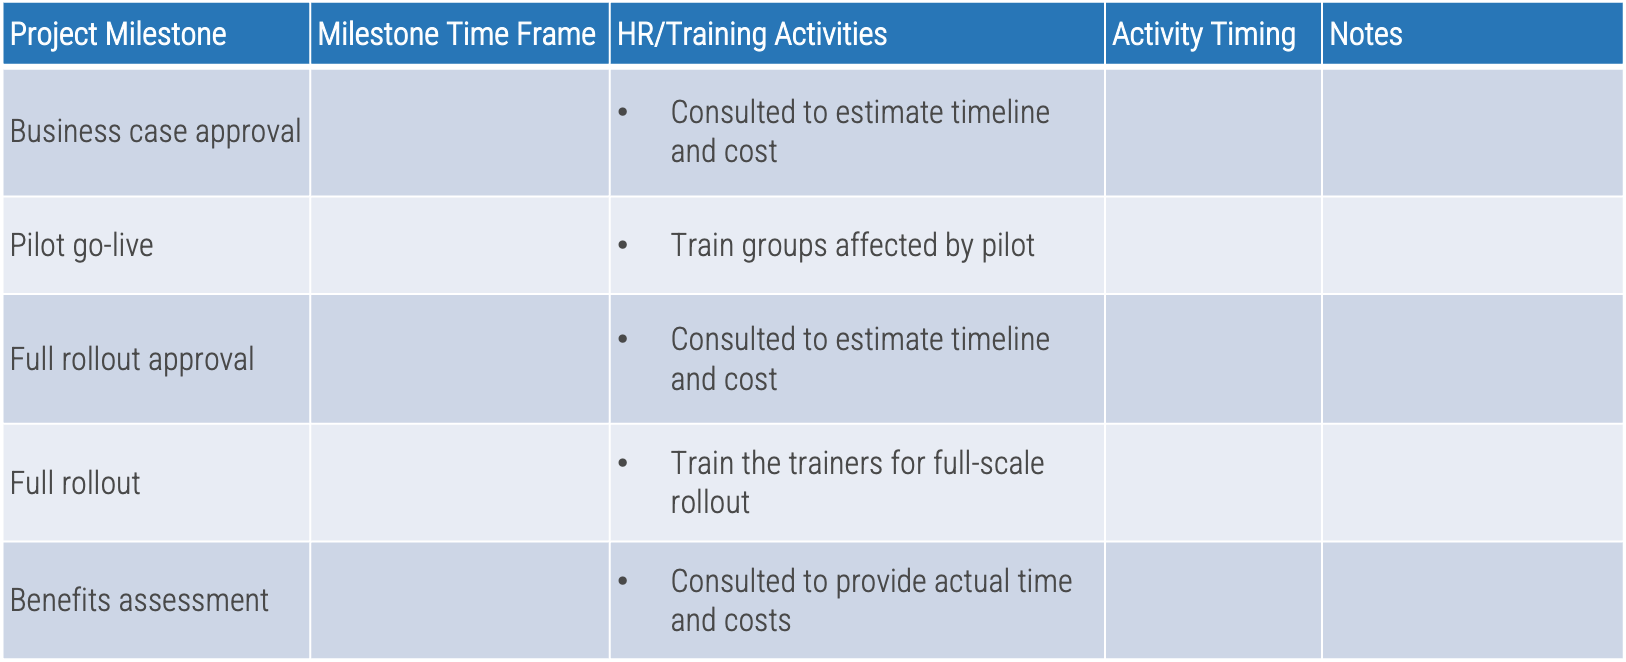 Training requirements example: Project milestones, milestone time frame, hr/training activities, activity timing, and notes.